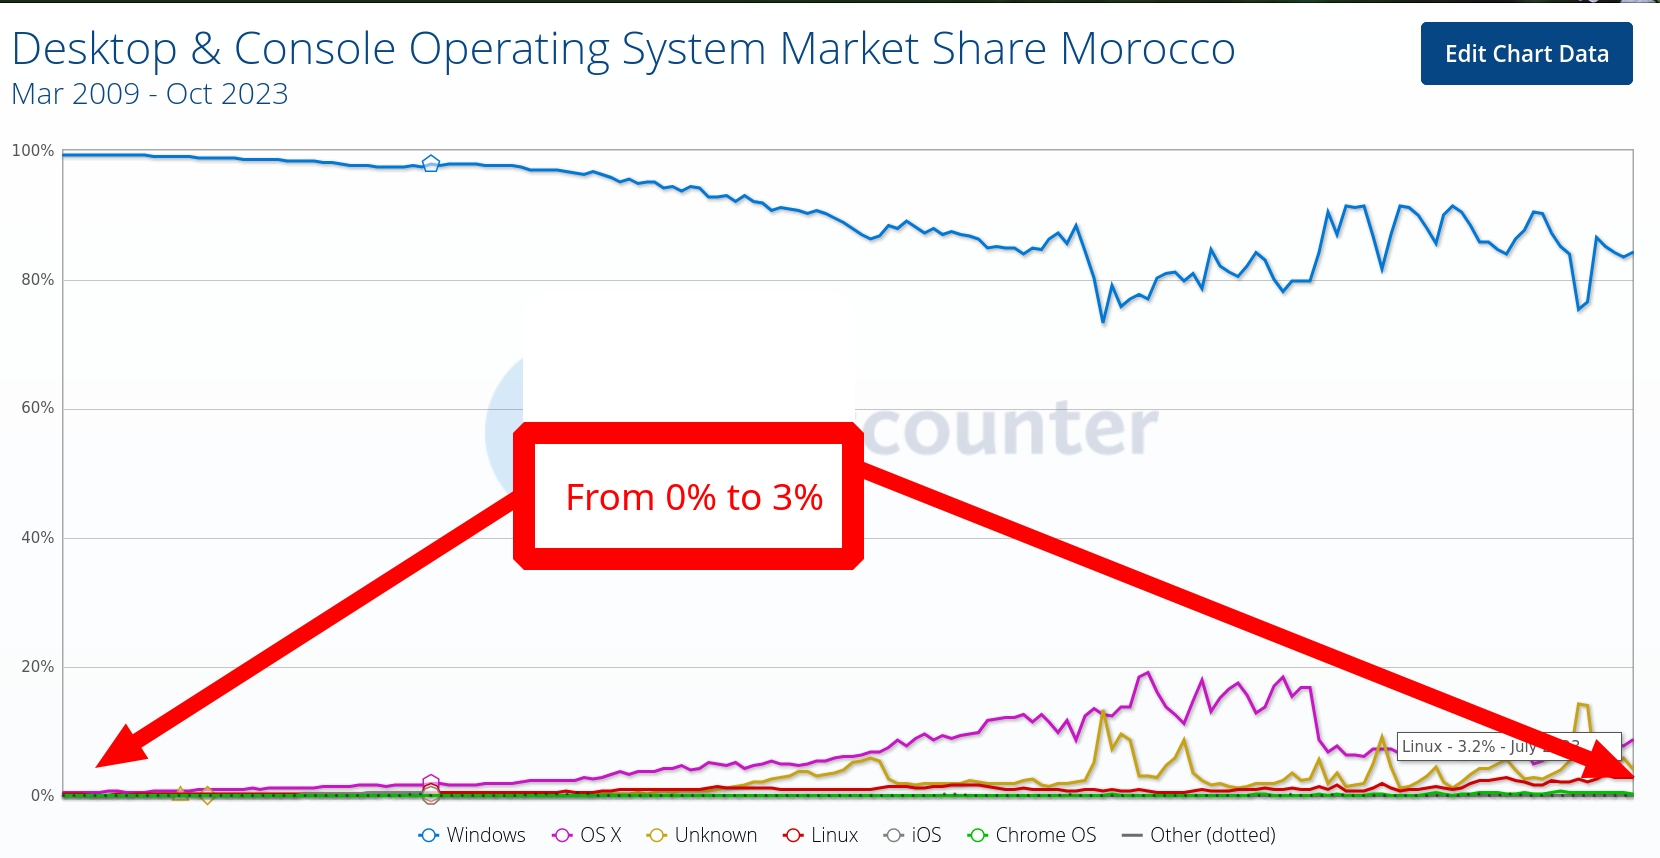 Desktop Operating System Market Share Morocco: From 0% to 3%